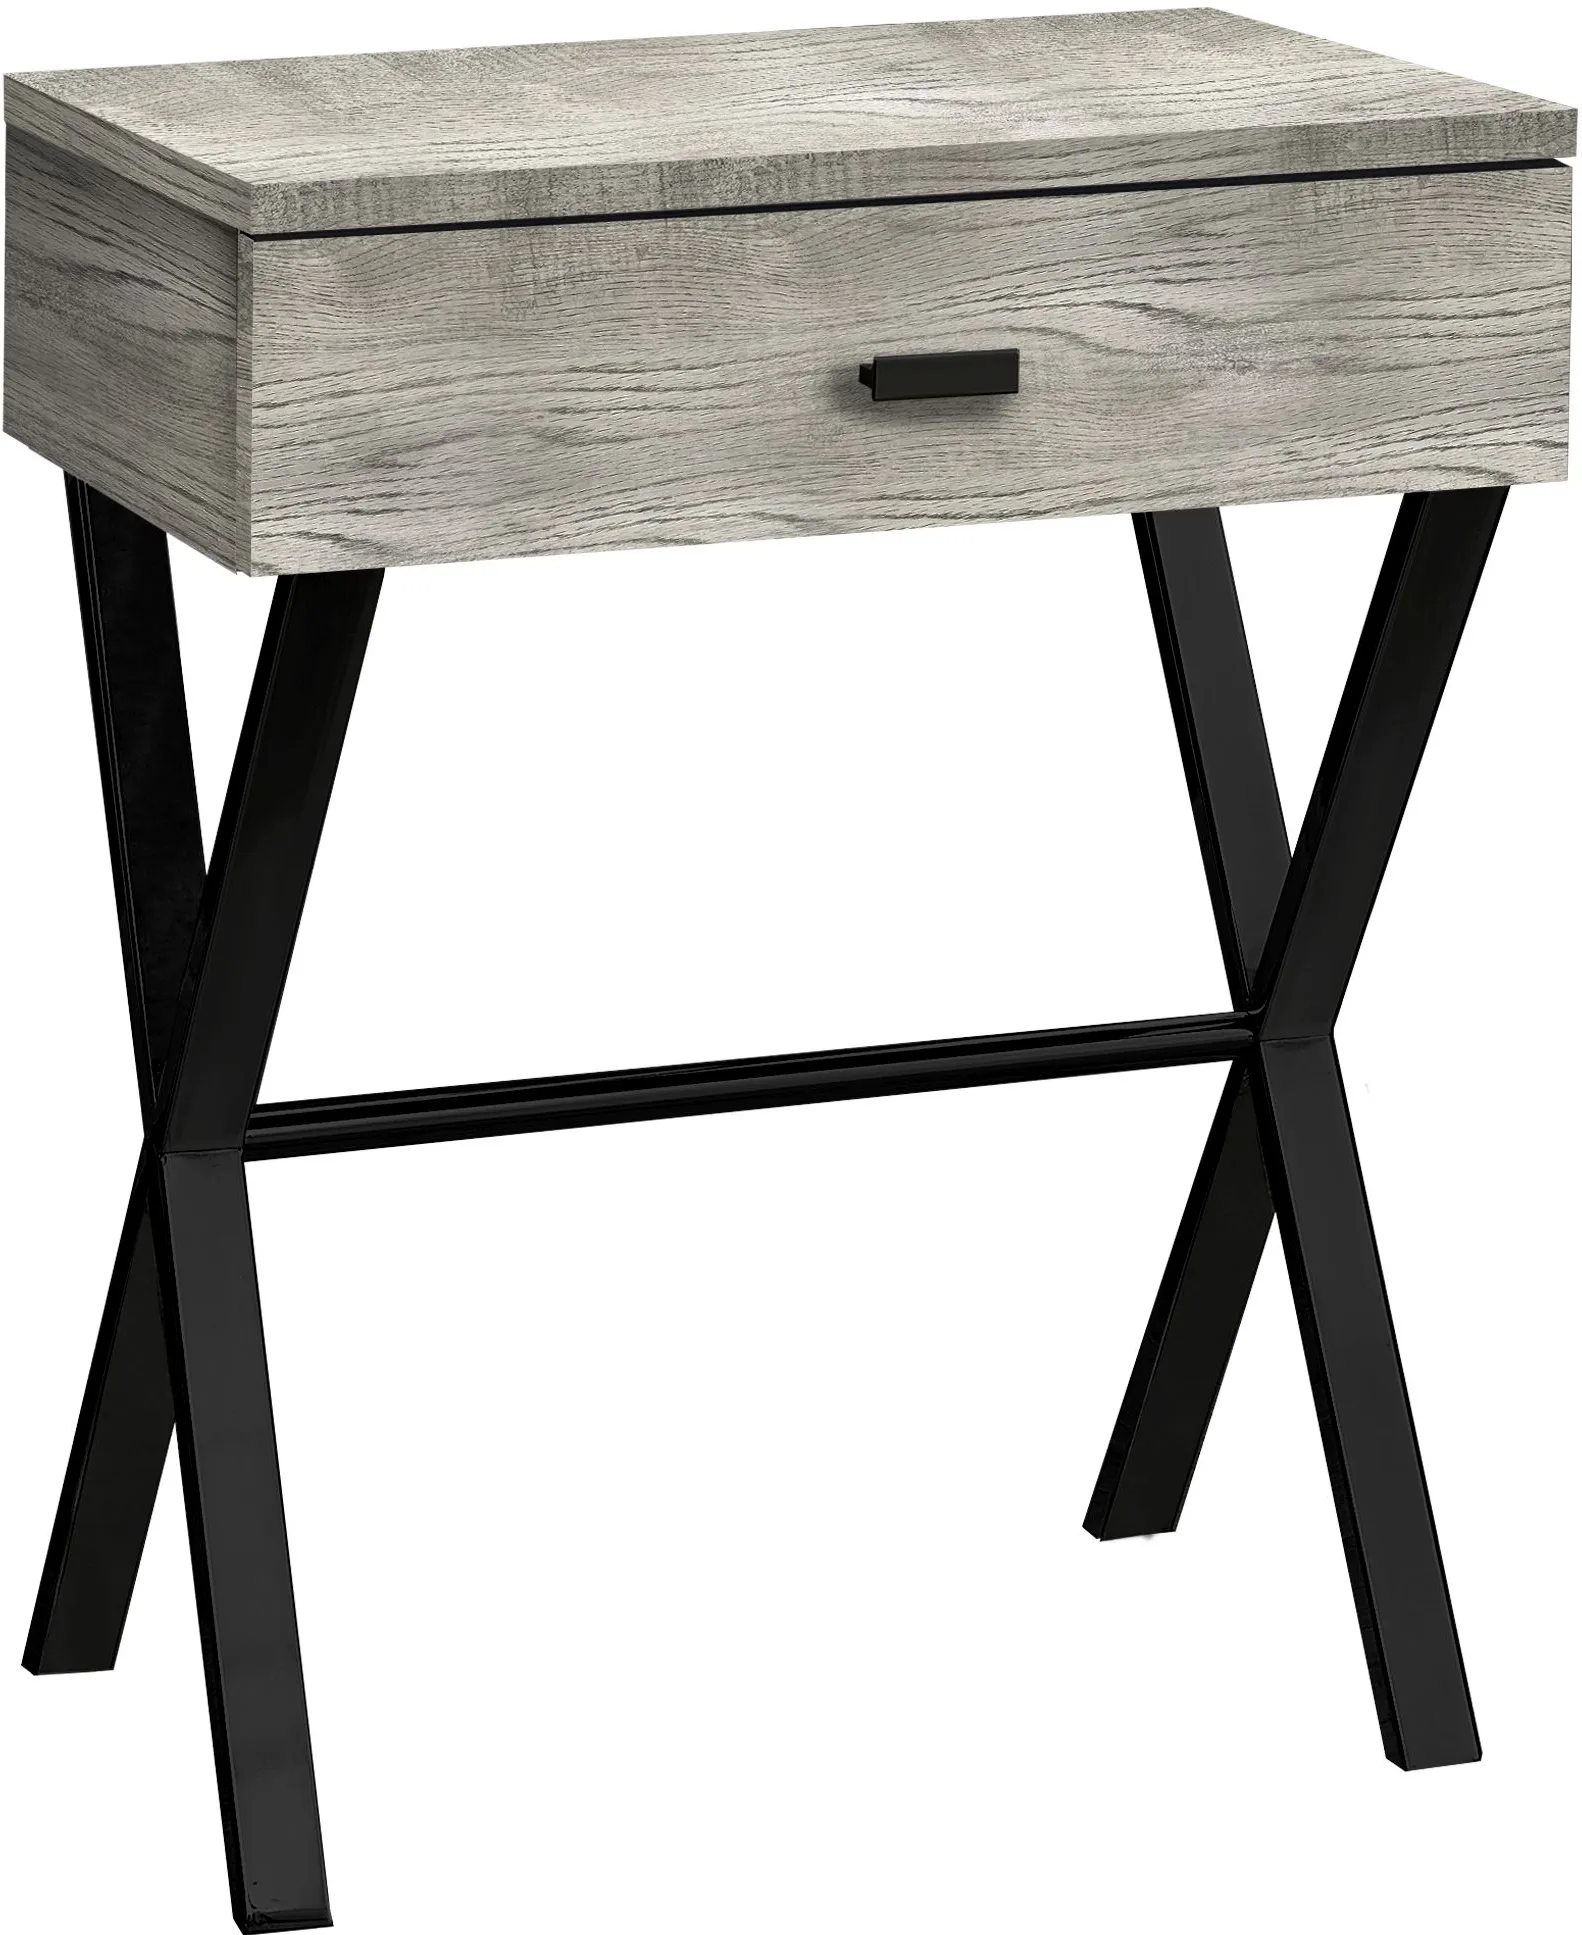 Accent Table, Side, End, Nightstand, Lamp, Storage Drawer, Living Room, Bedroom, Metal, Laminate, Grey, Black, Contemporary, Modern